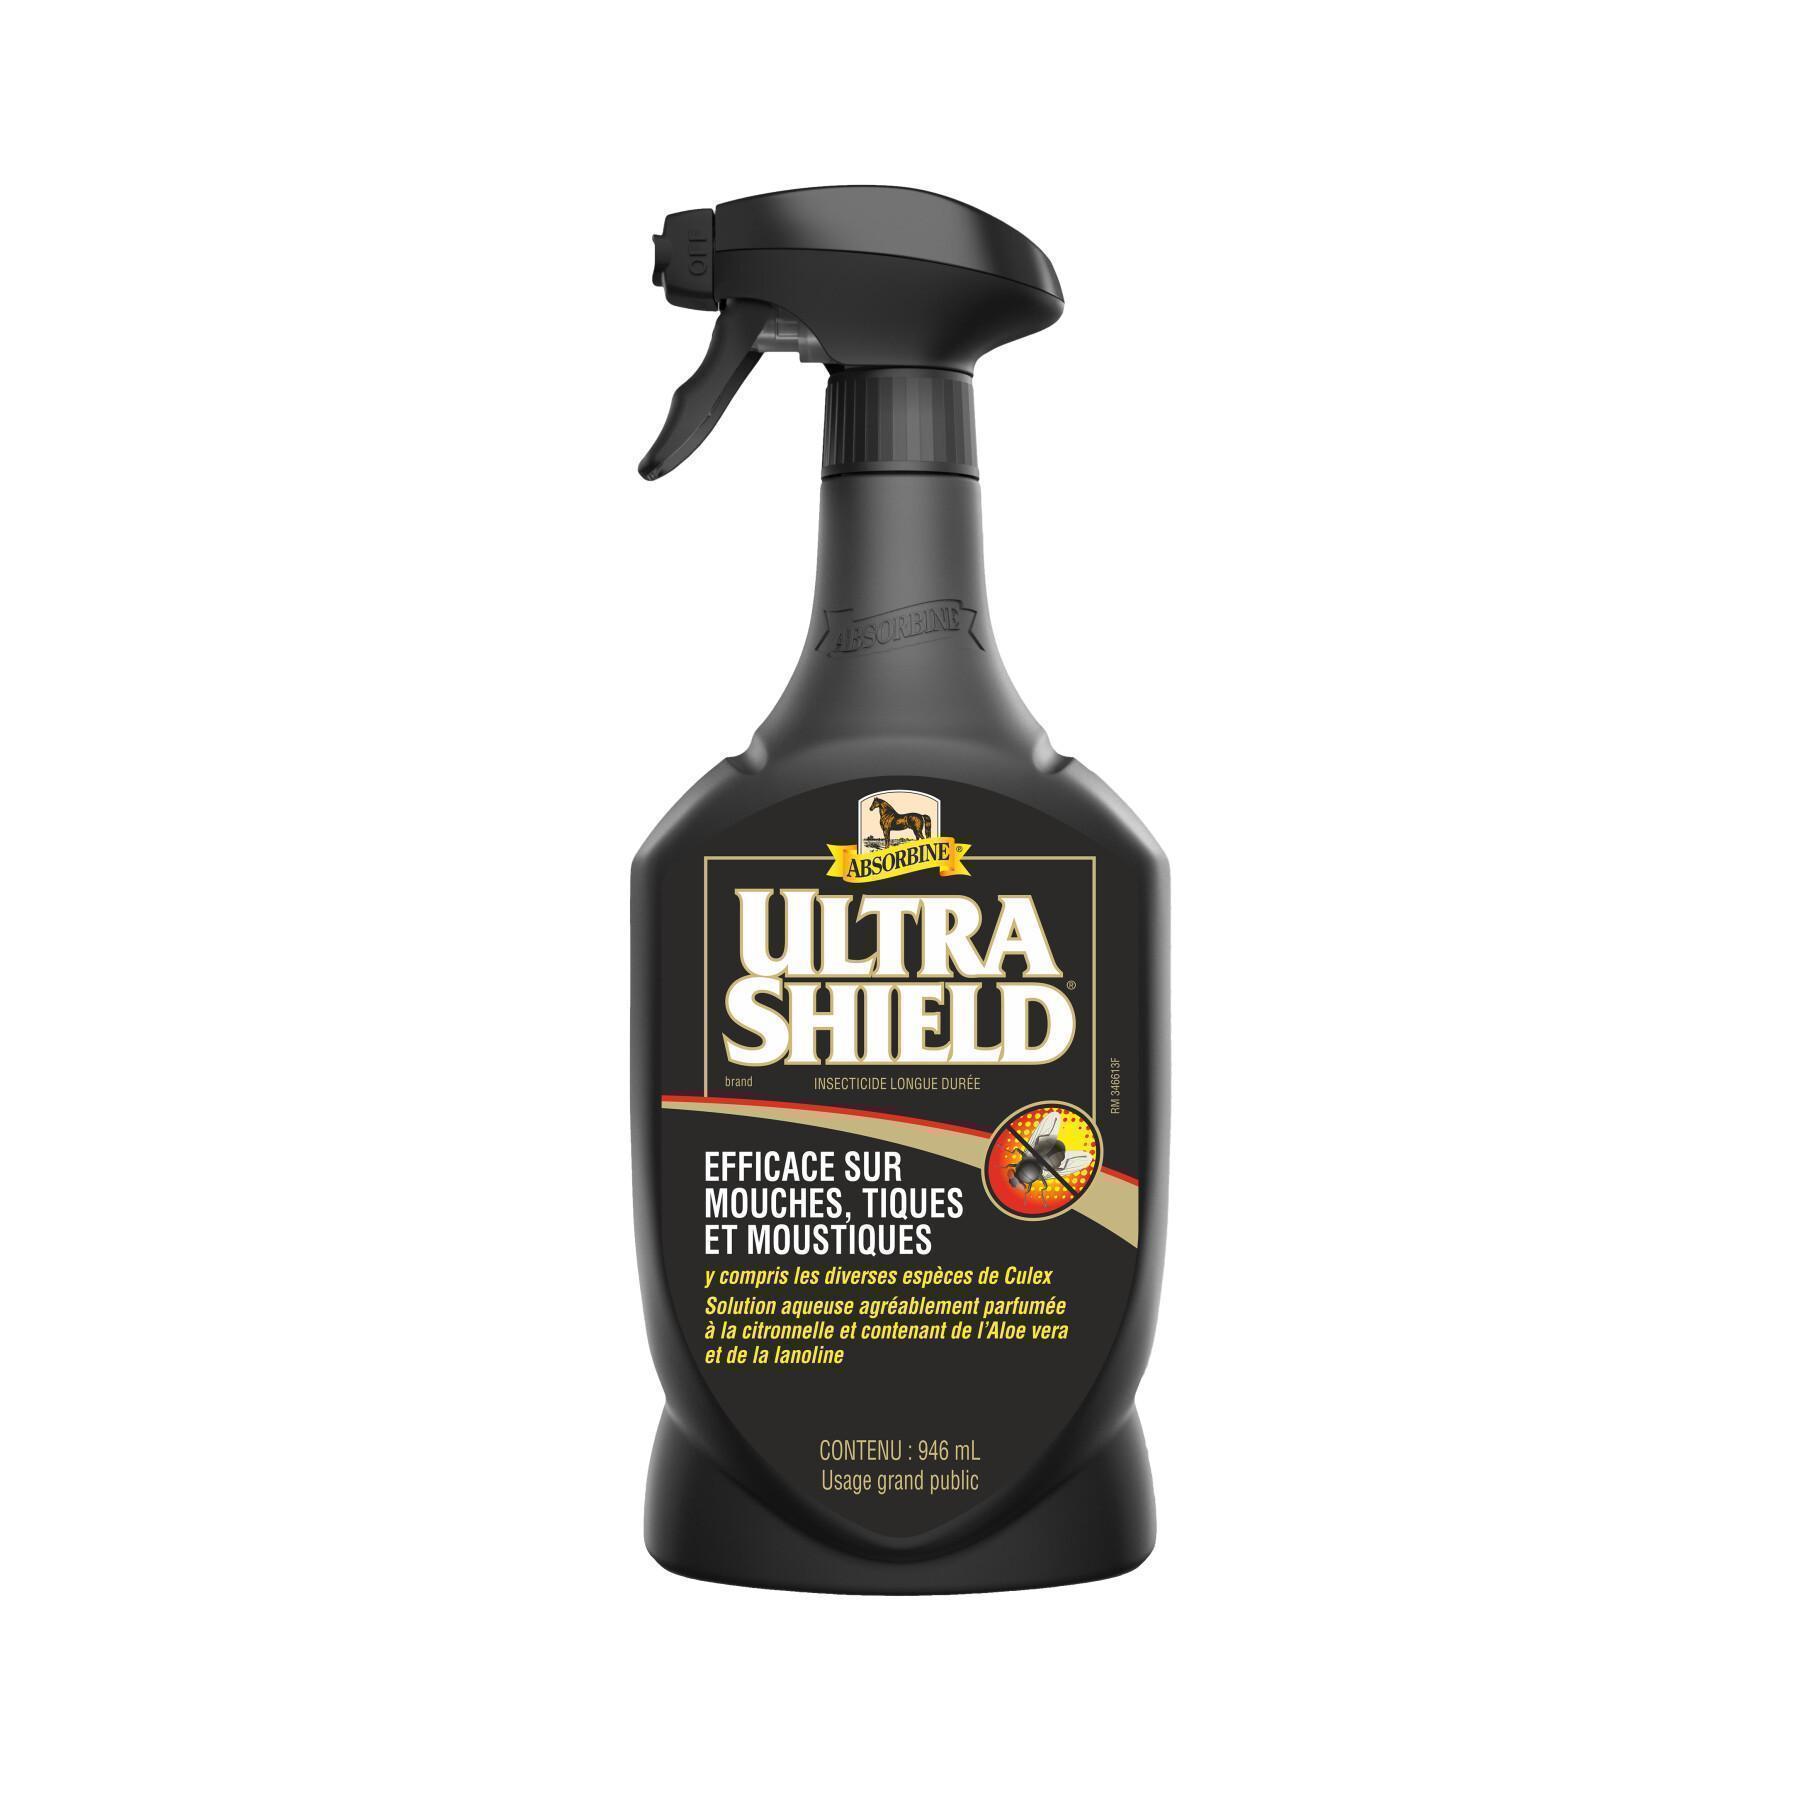 Spray anti-insectes pour cheval Absorbine Ultrashiled